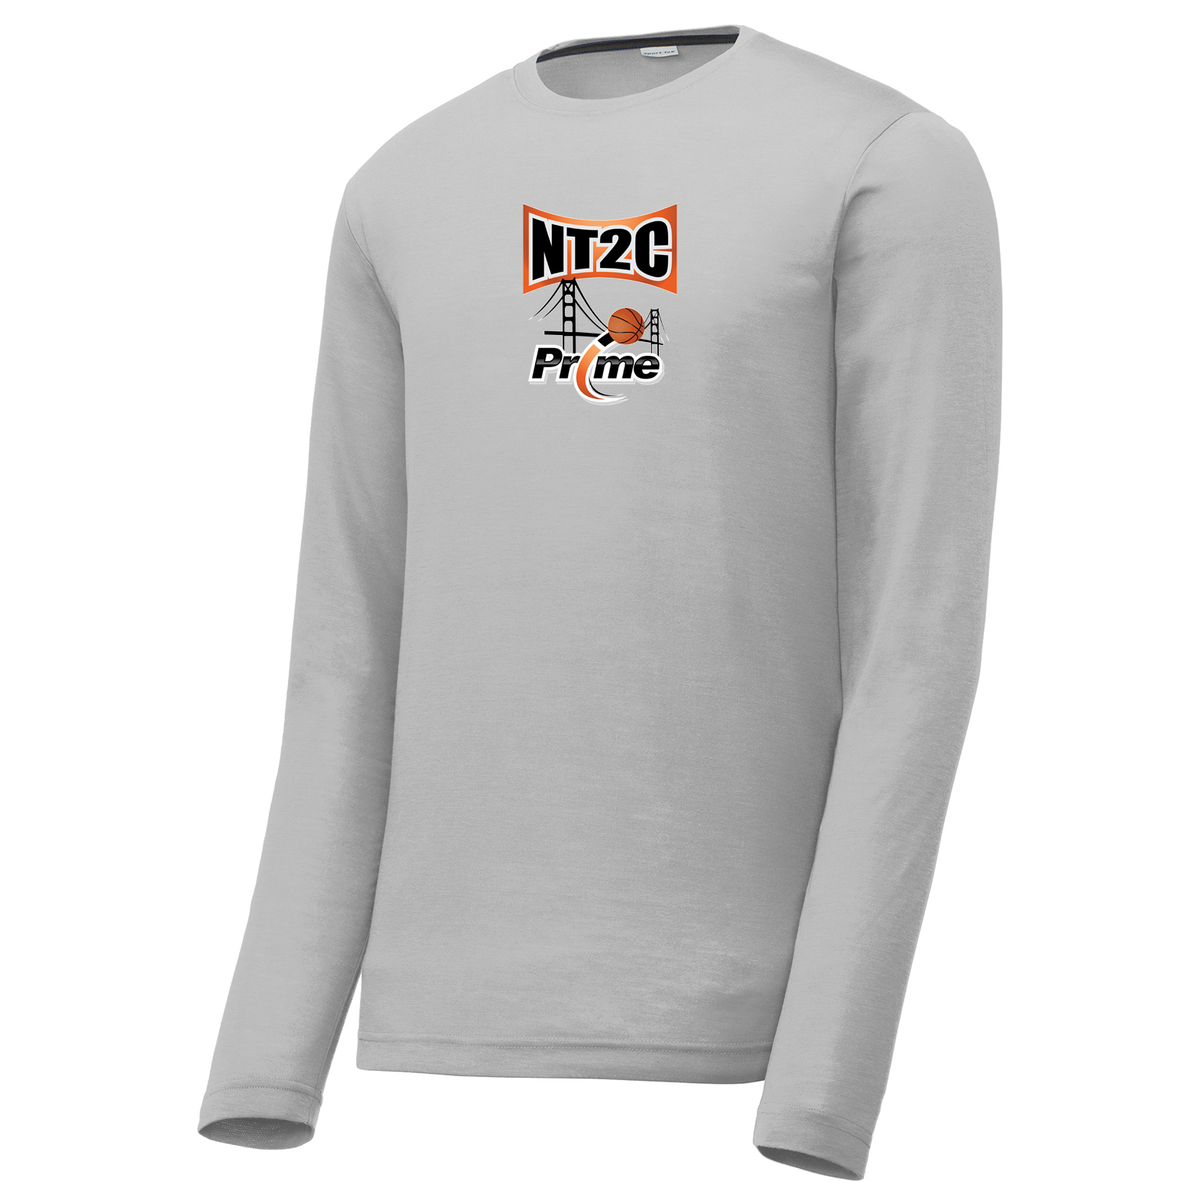 NT2C Prime Basketball Long Sleeve CottonTouch Performance Shirt